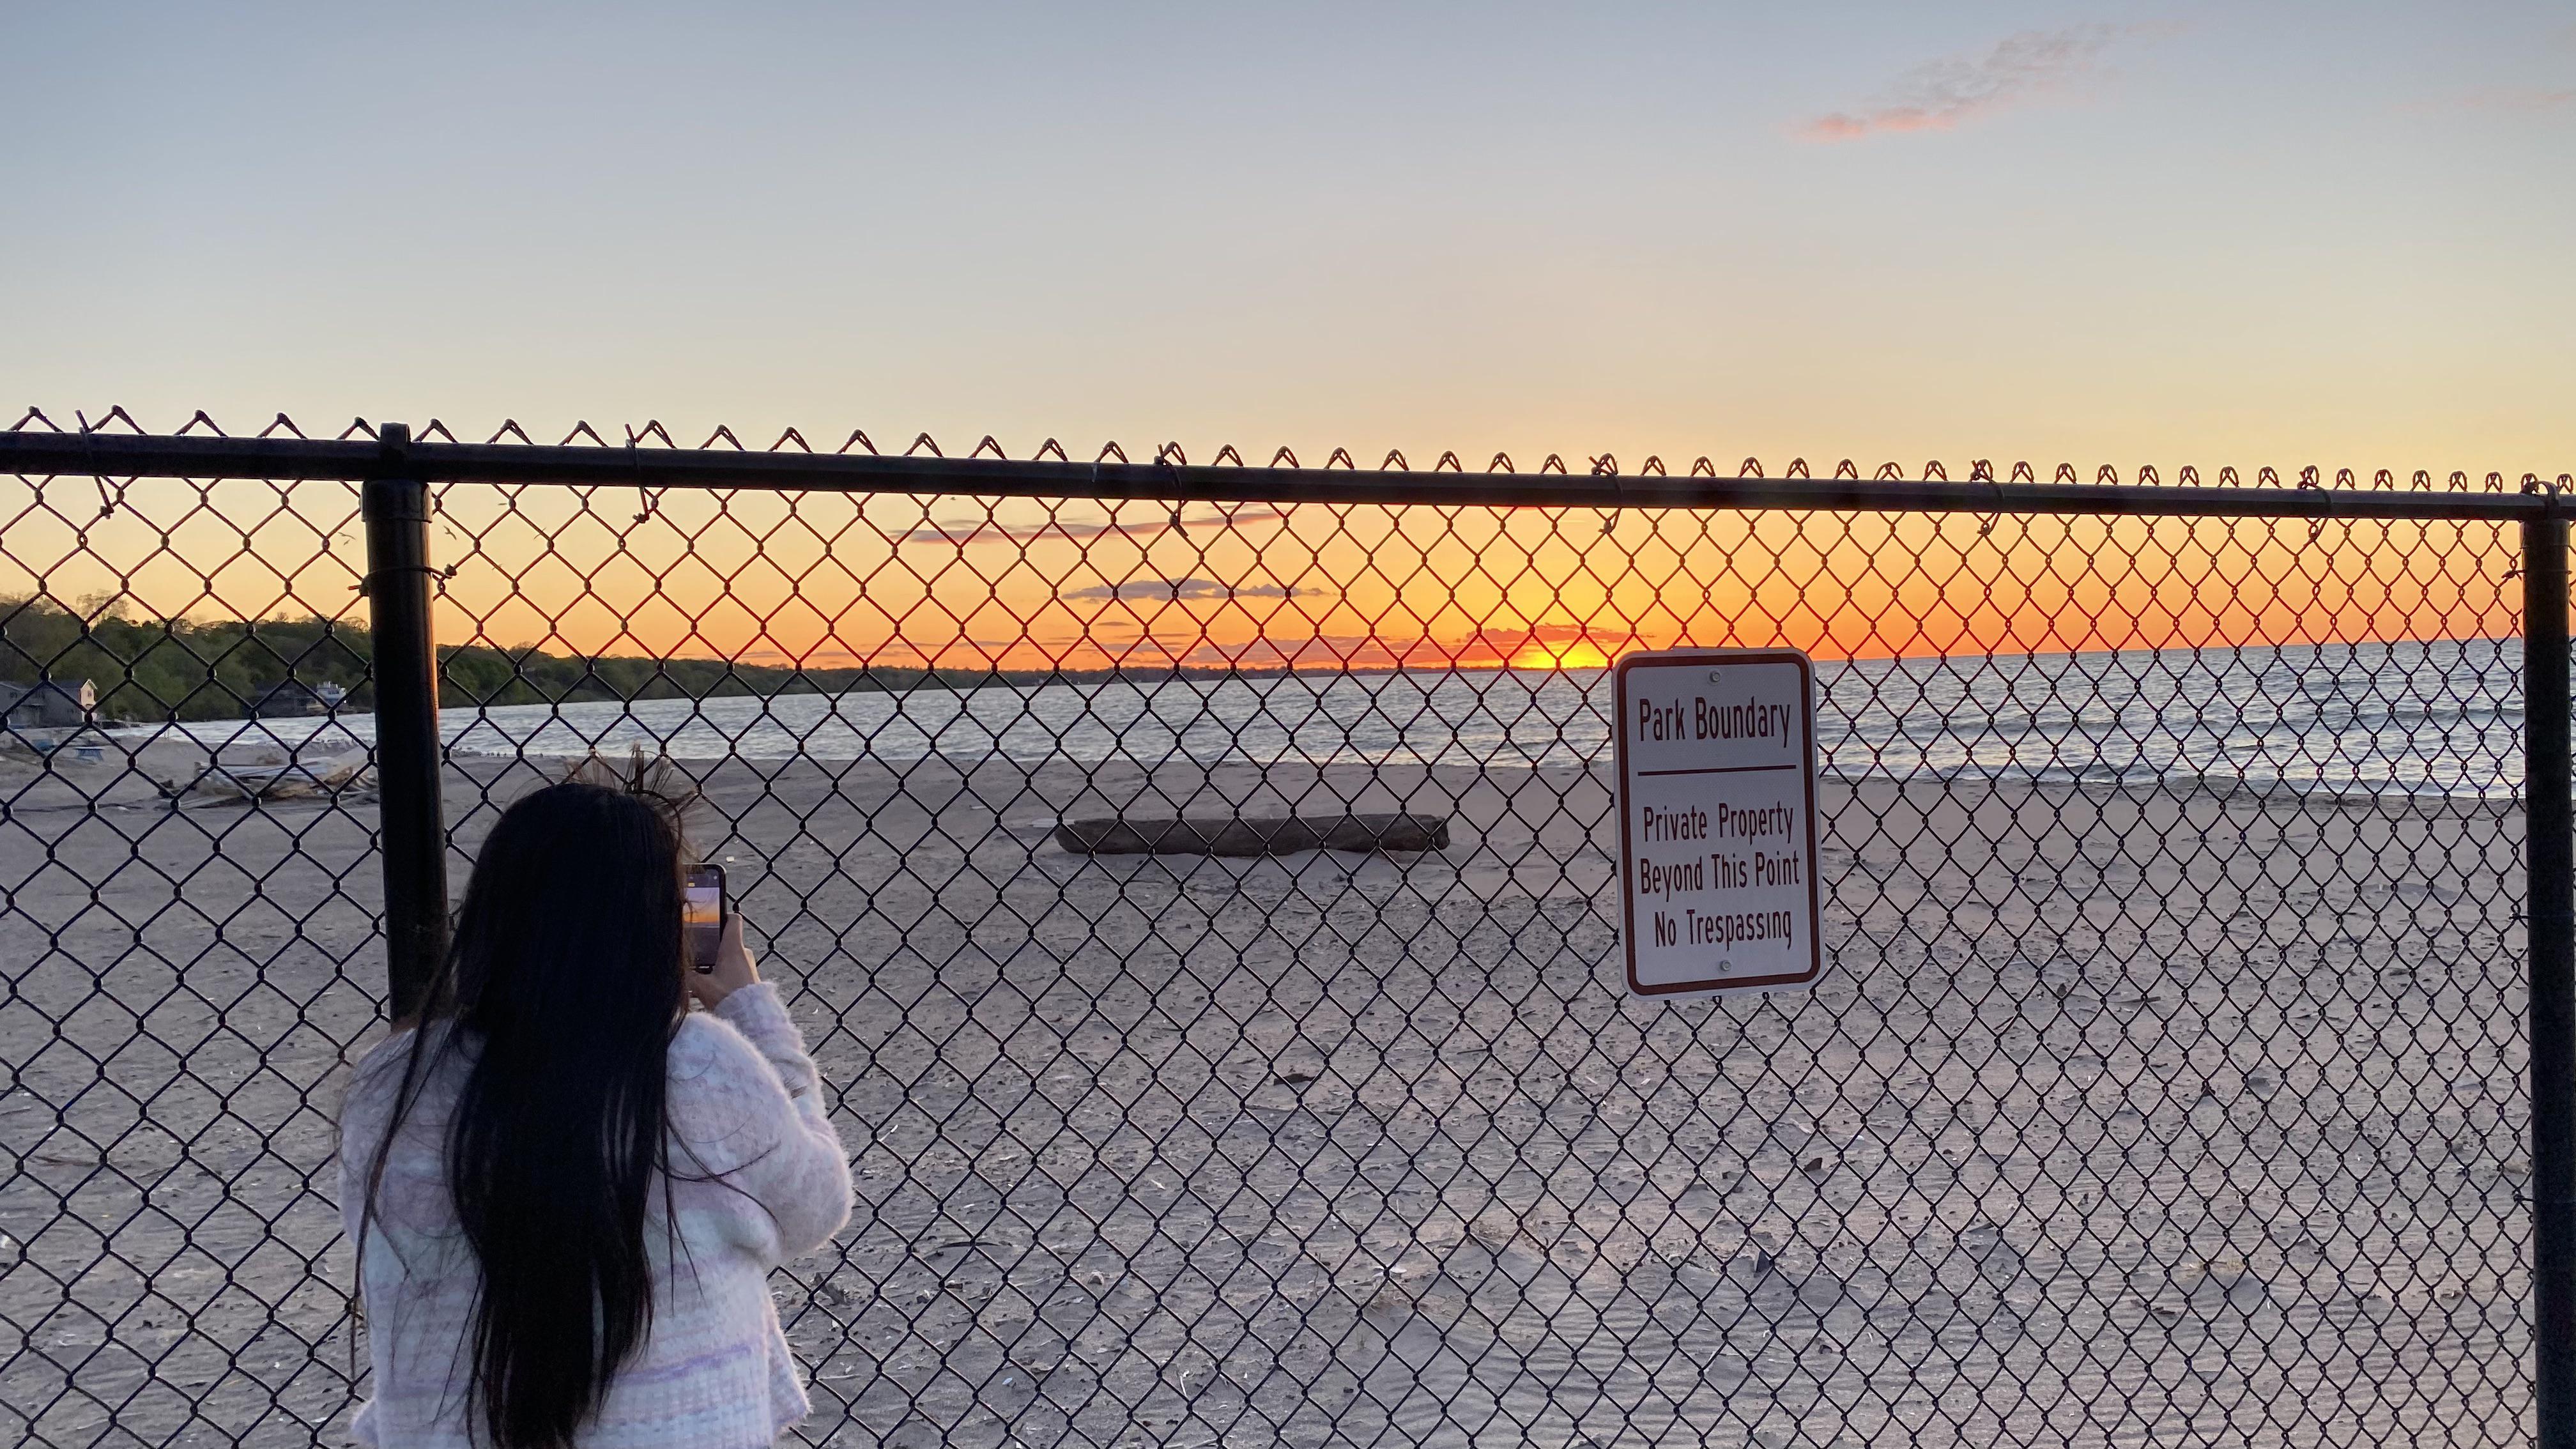 Our local park’s beach: chain link fence separates our romantic evening from sunset